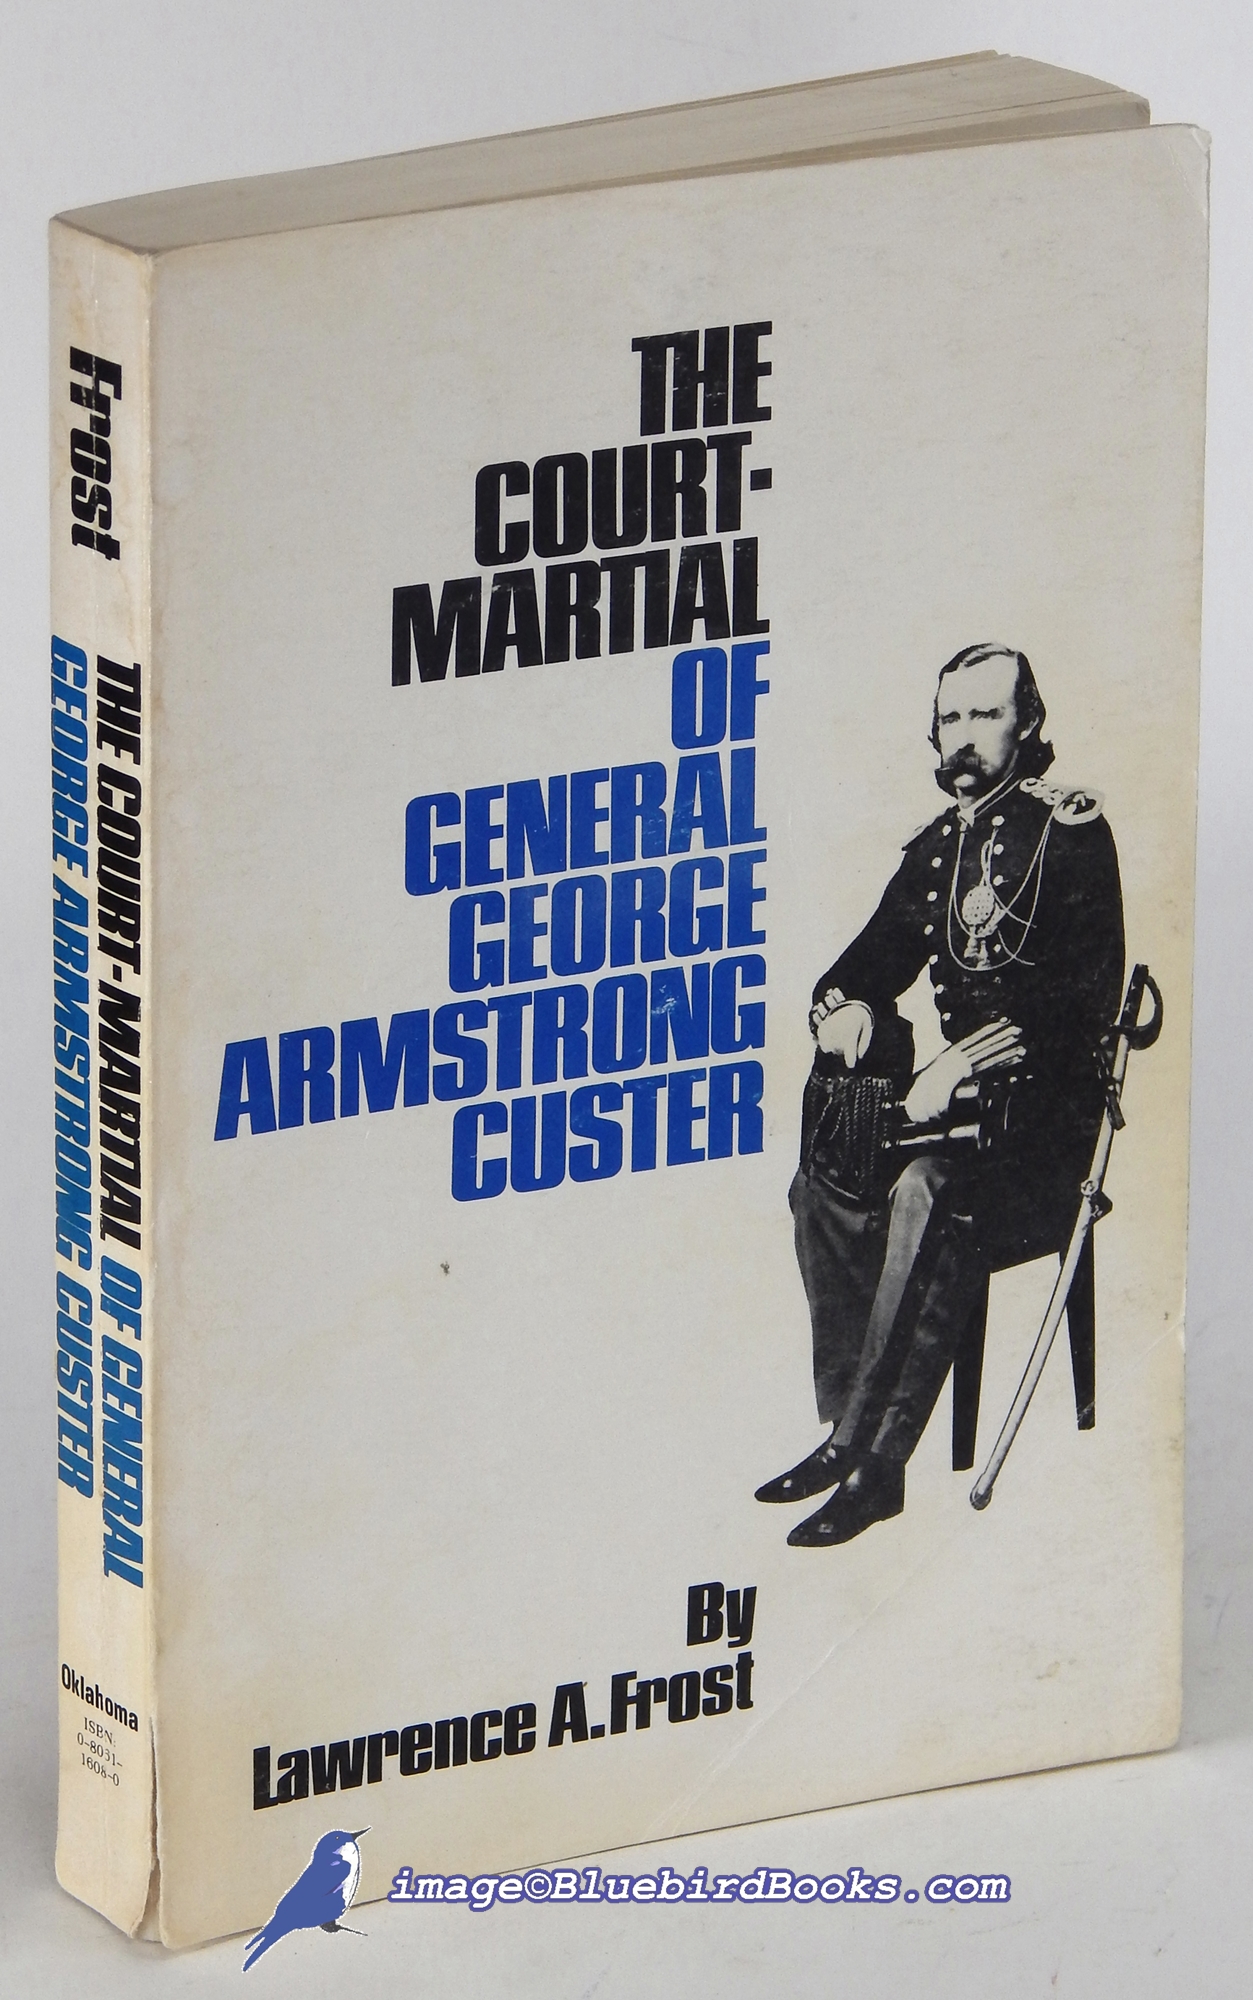 FROST, LAWRENCE A. - The Court-Martial of General George Armstrong Custer